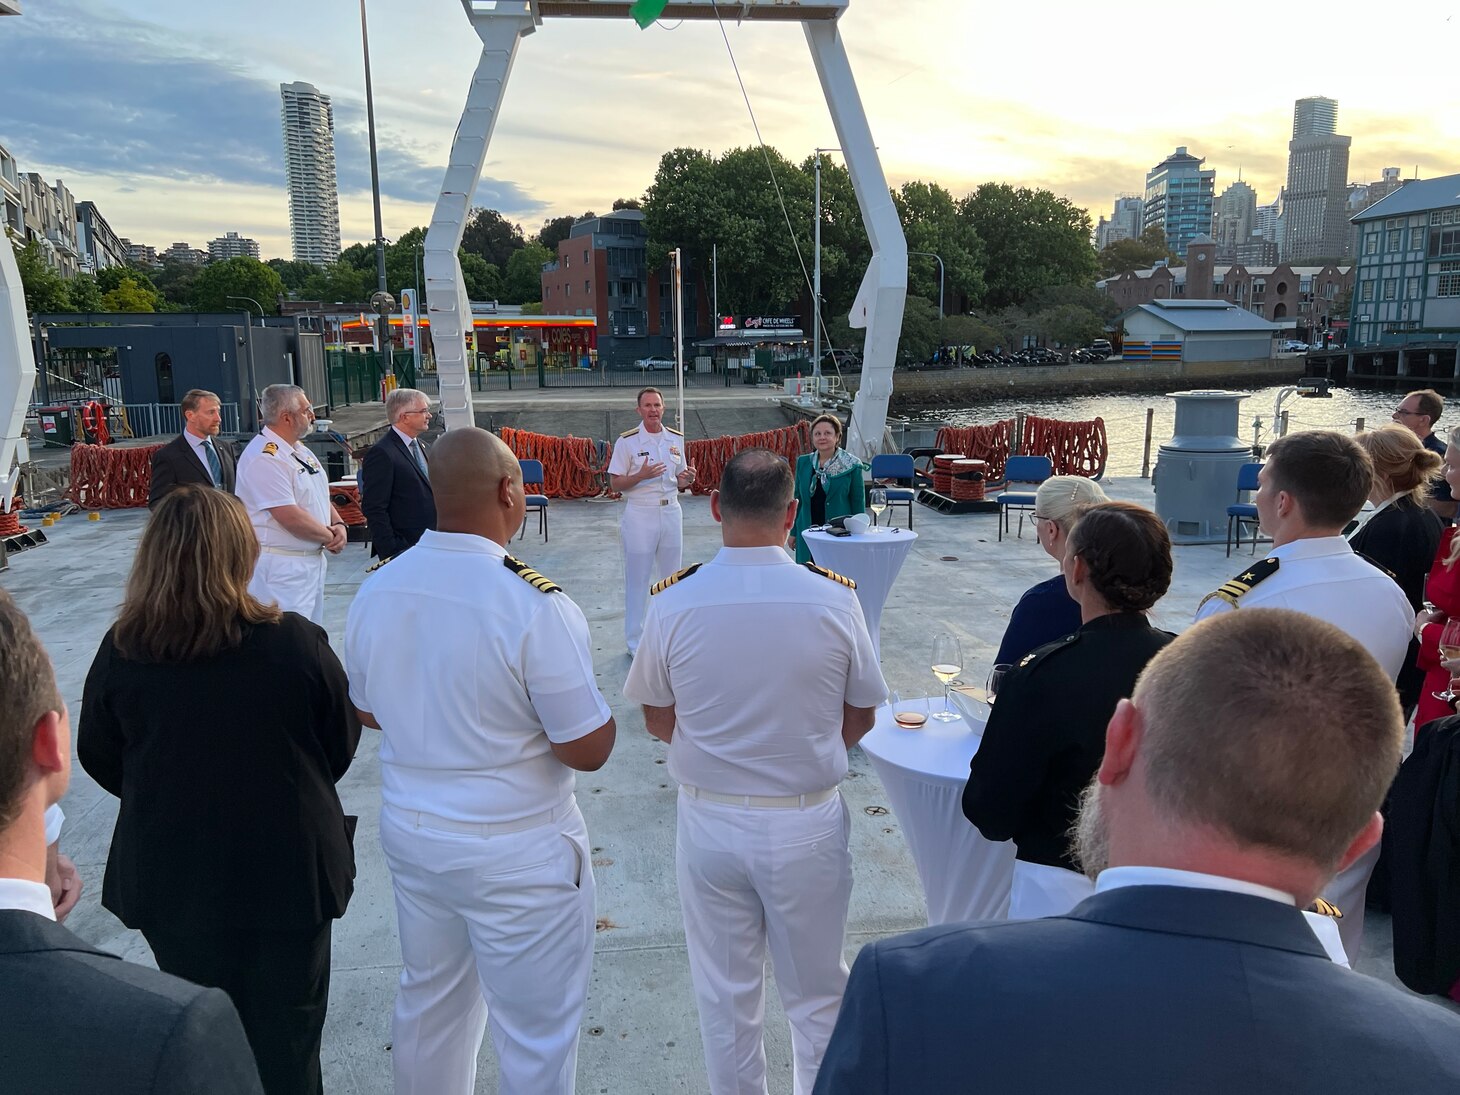 USNS Mary Sears was alongside in Sydney, Australia for a scheduled port visit and later on in the visit held a reception for members of the Australian Defence Organisation.